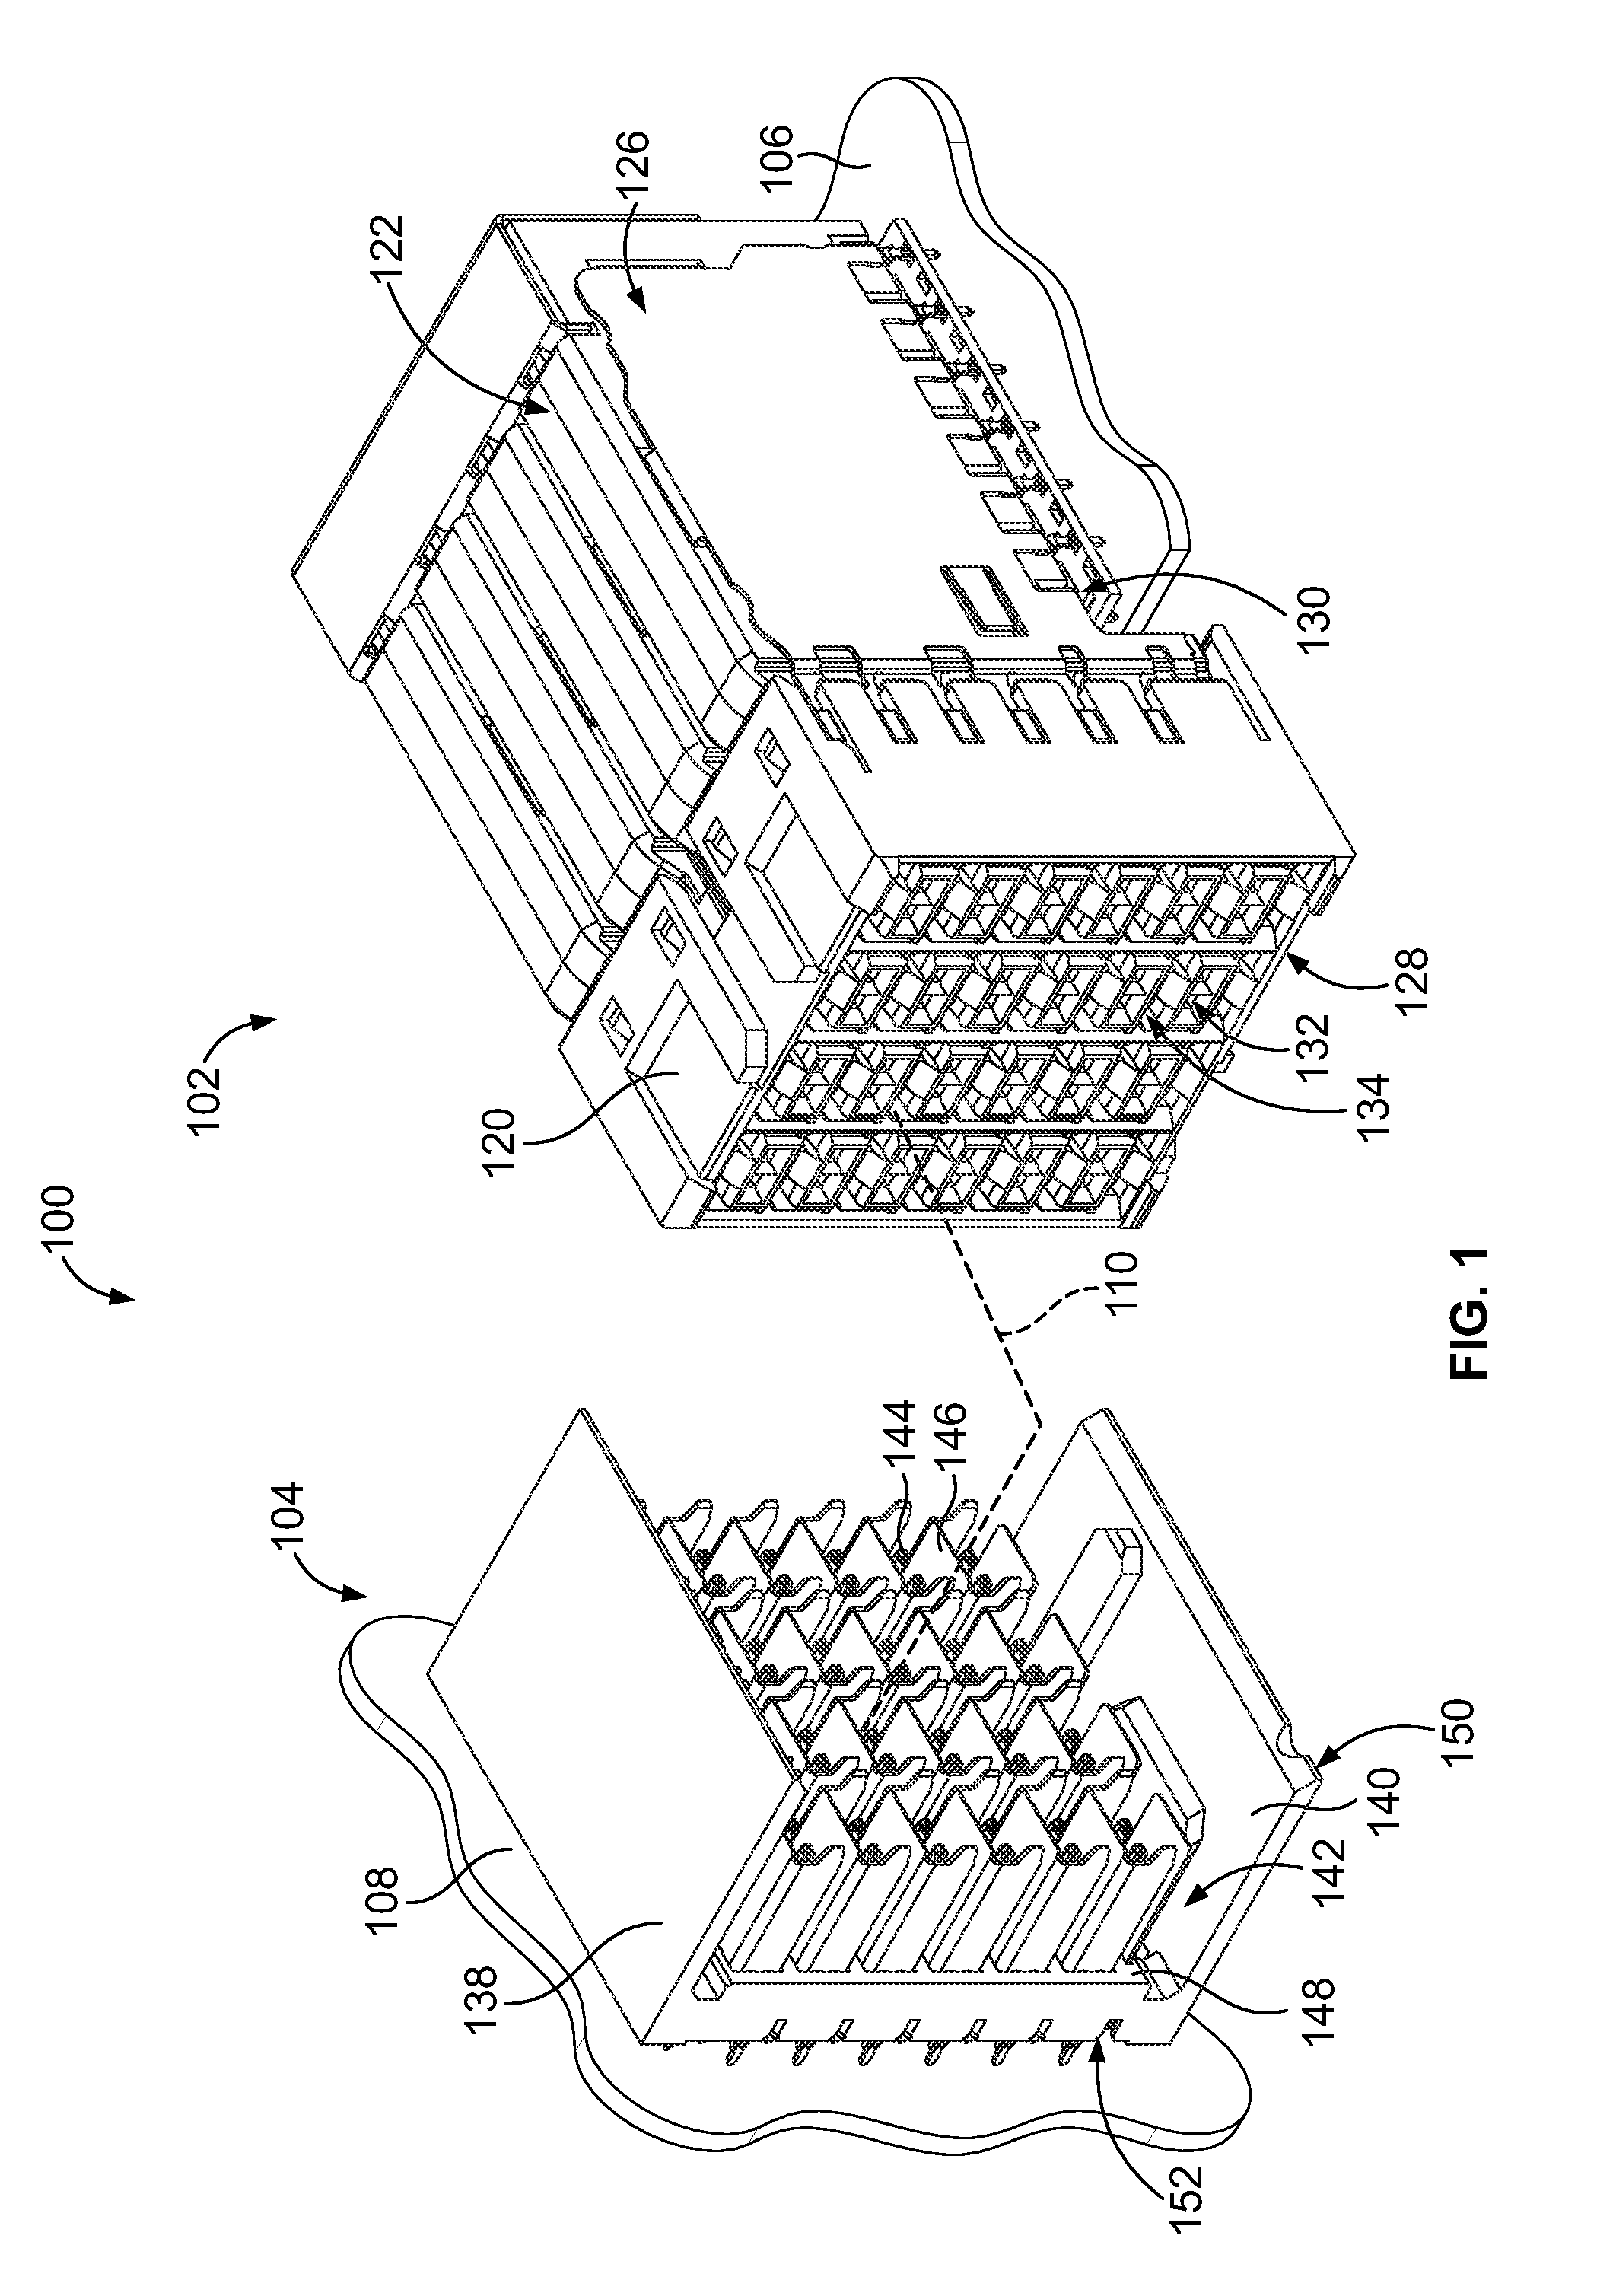 Grounding structures for a receptacle assembly